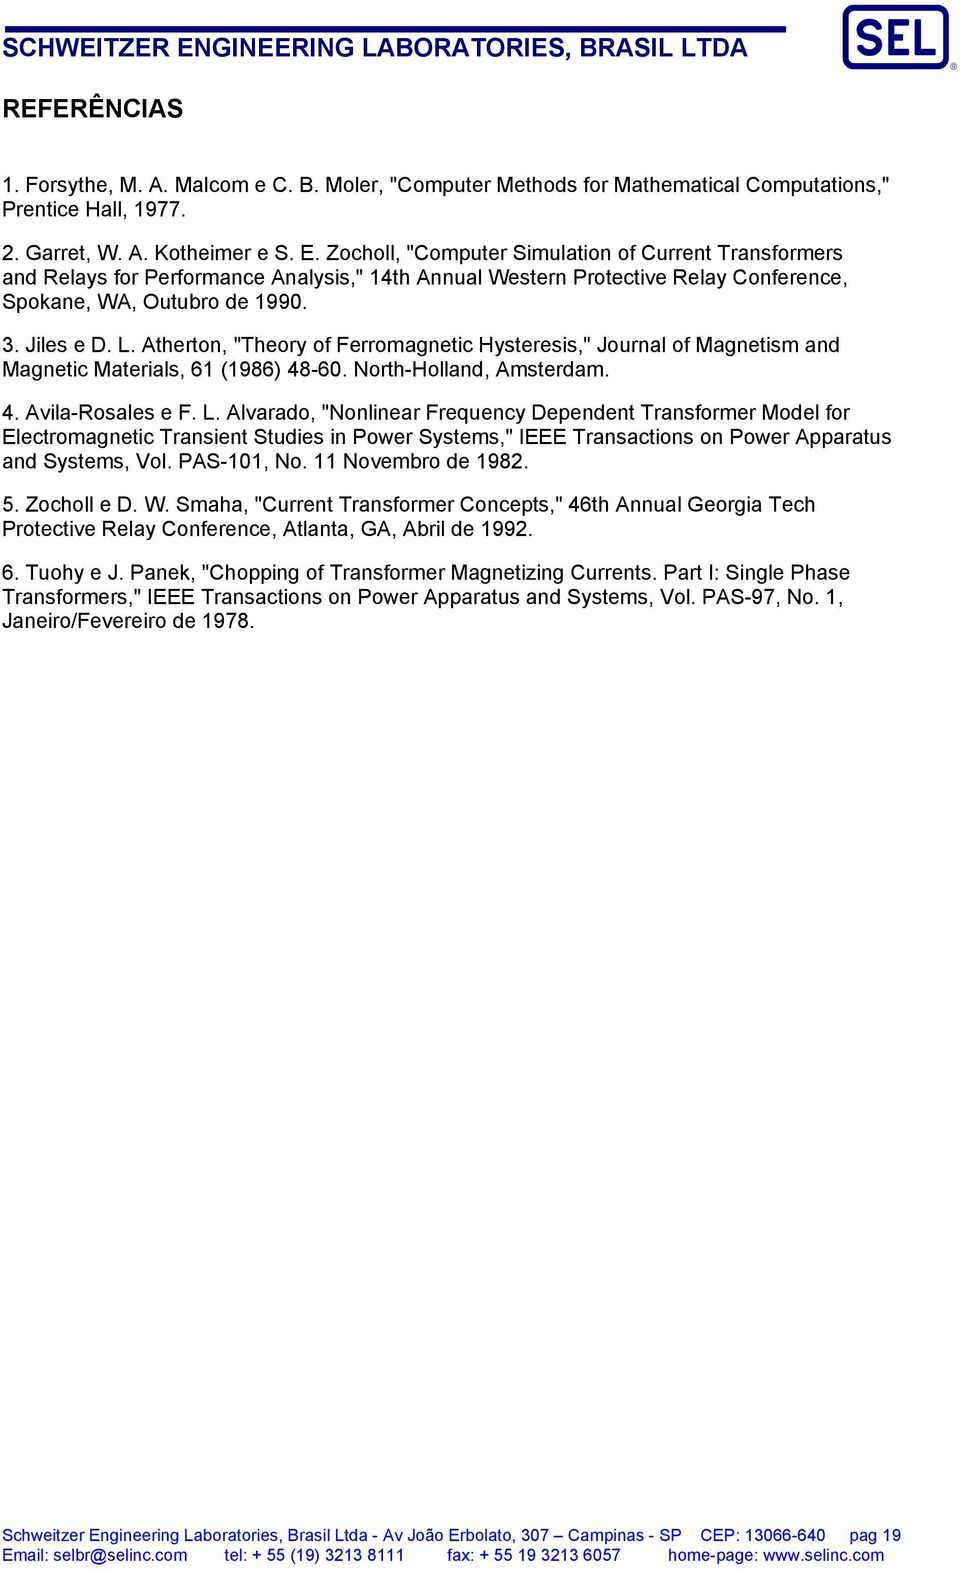 Ferromagnetic Hysteresis," Journal of Magnetism and Magnetic Materials, 6 (986) 48-60 North-Holland, Amsterdam 4 Avila-Rosales e F L Alvarado, "Nonlinear Frequency Dependent Transformer Model for